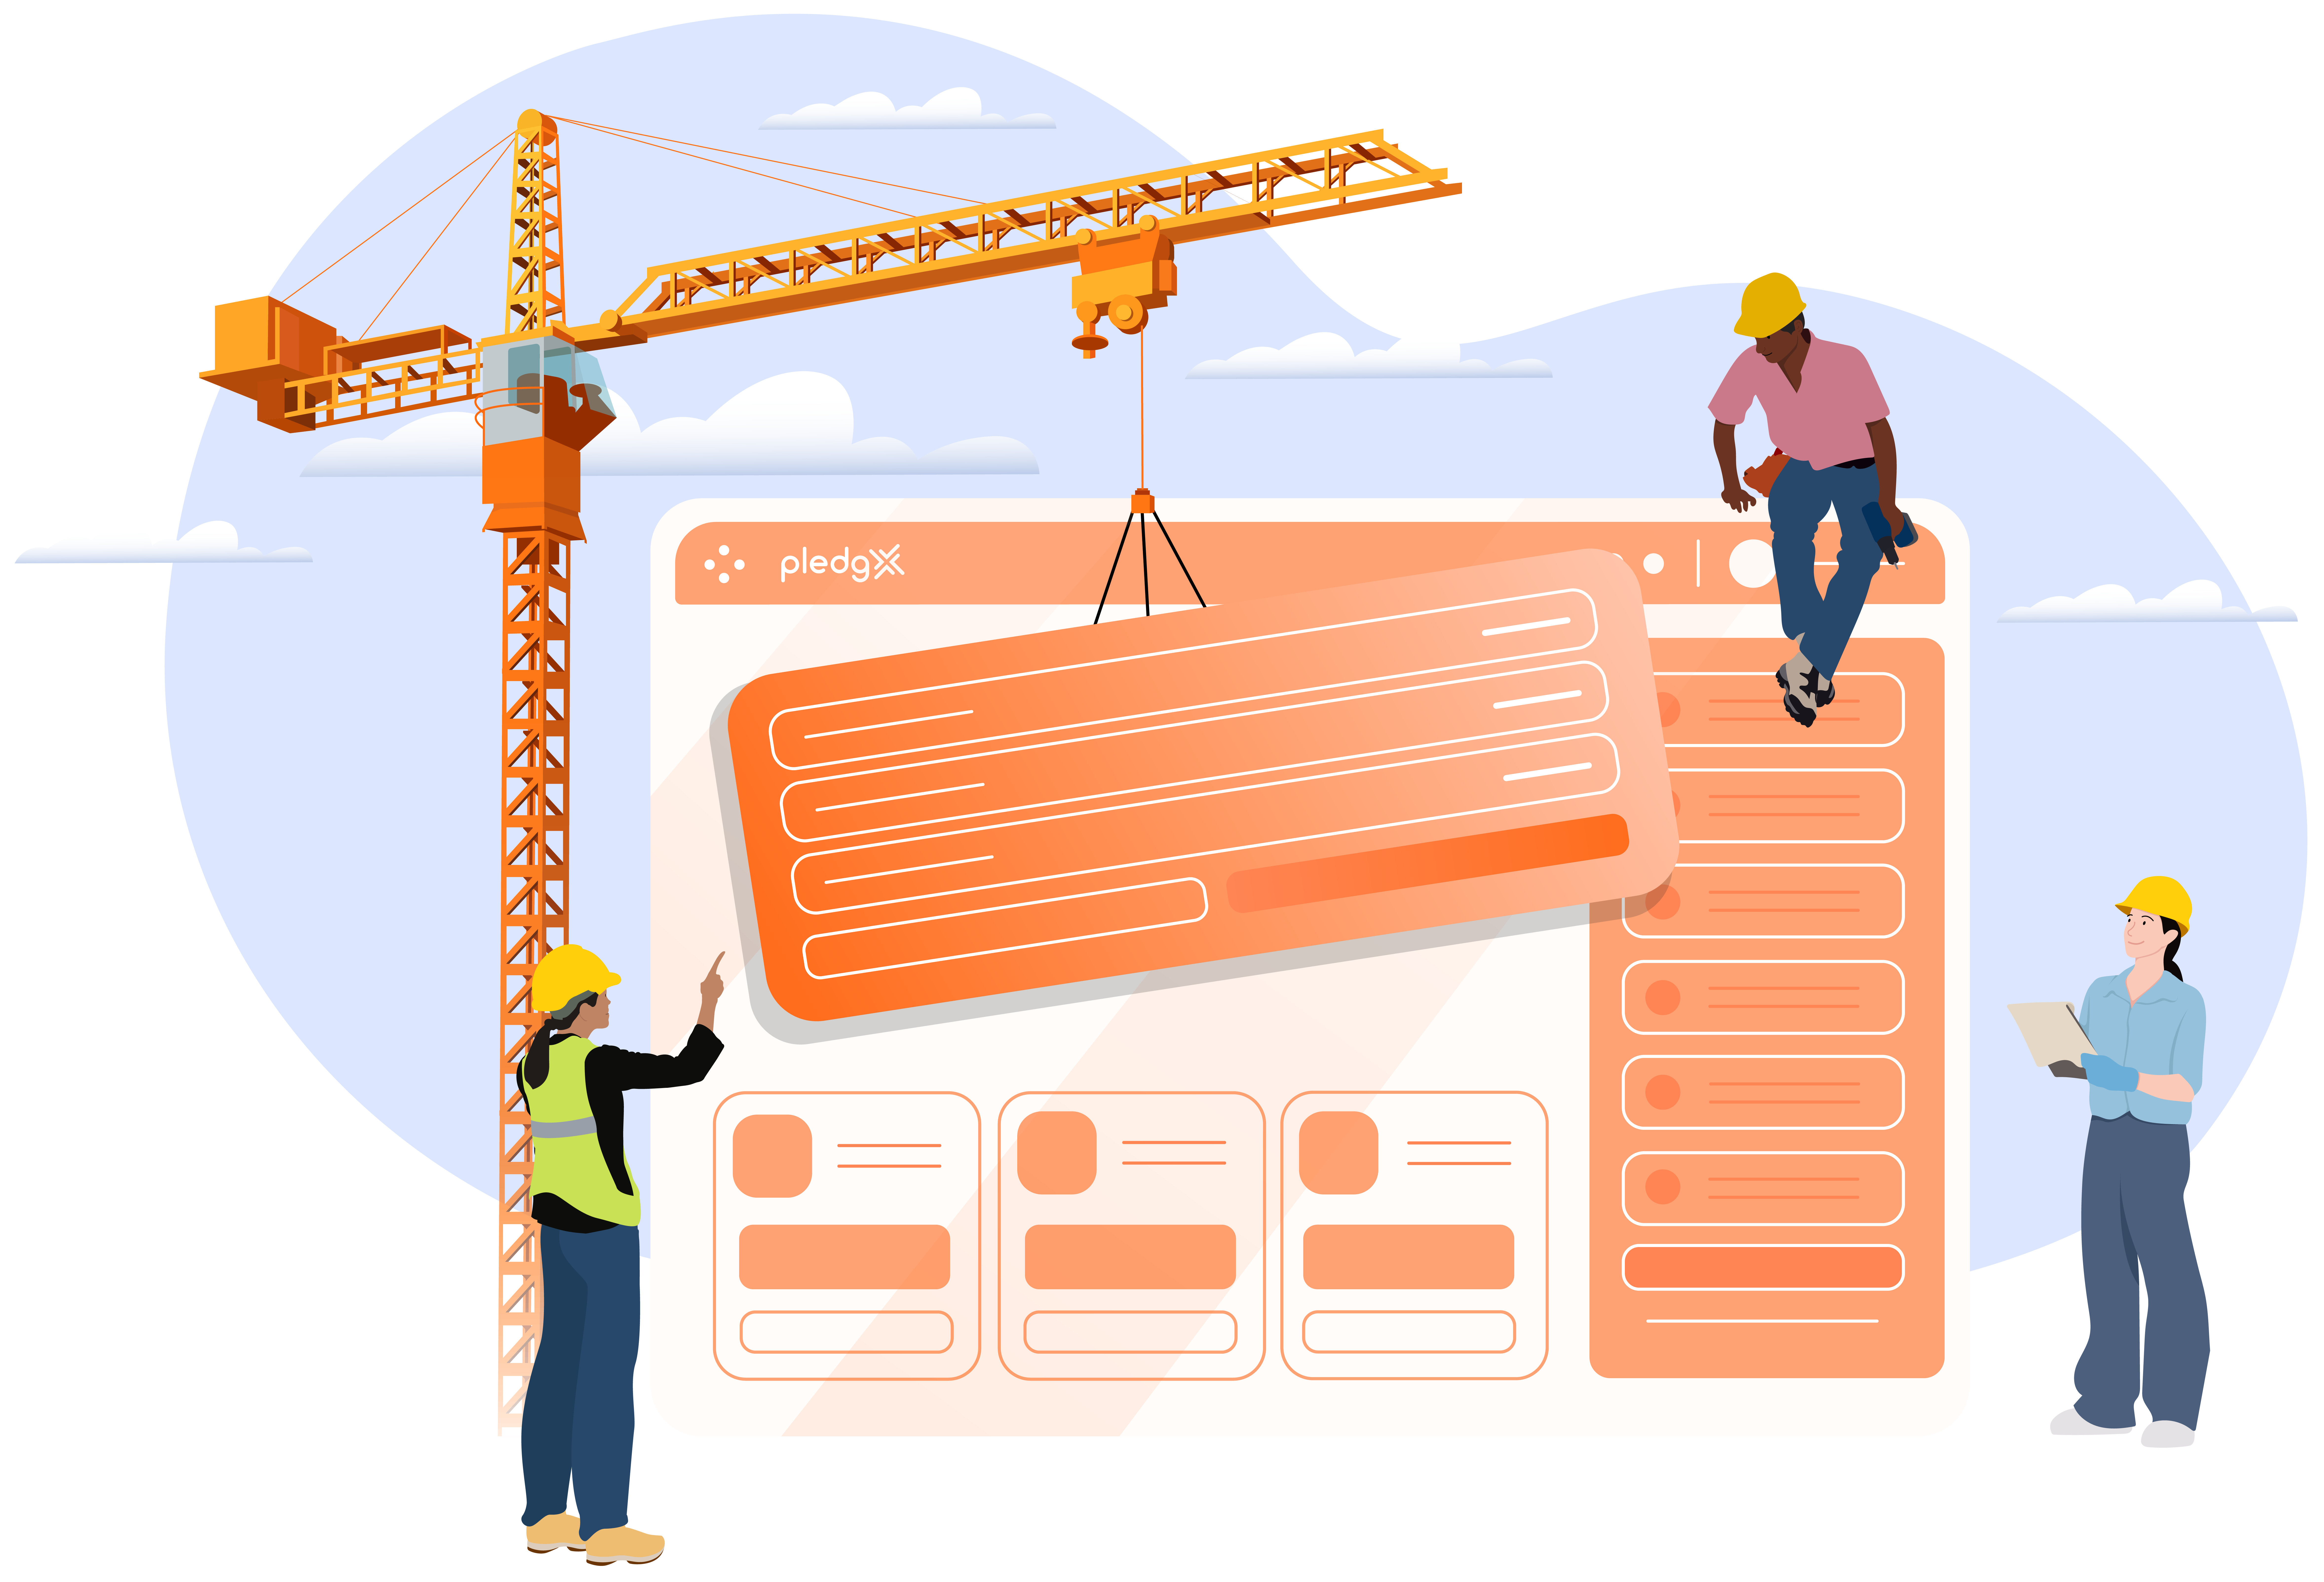 The PledgX dashboard drawn in a cartoonish style is being put together by a crane and 3 construction workers. 2 women stand on either side of the dashboard while a man sits on top.